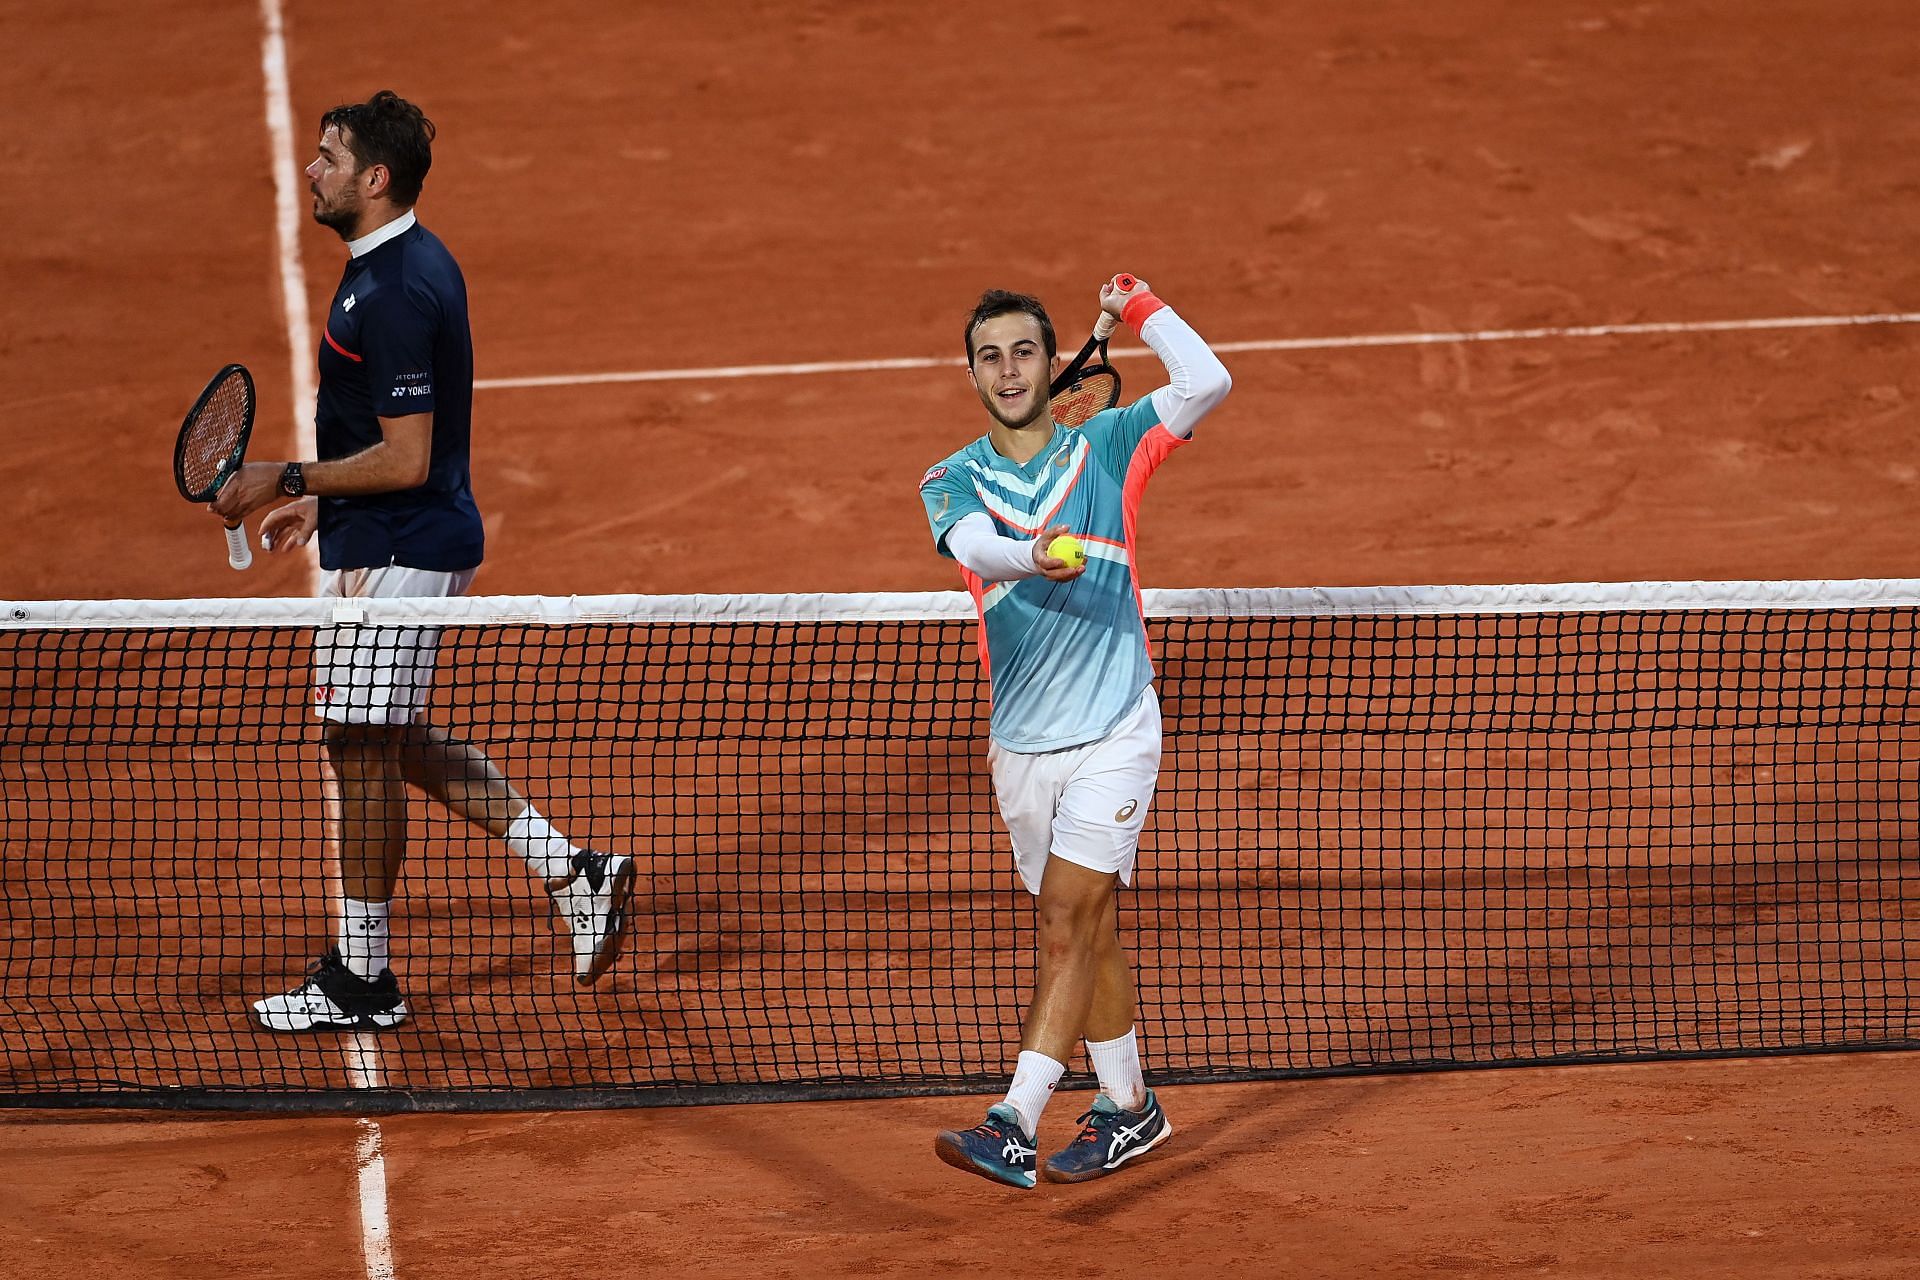 Stan Wawrinka and Hugo Gaston after their third round match at the 2020 French Open